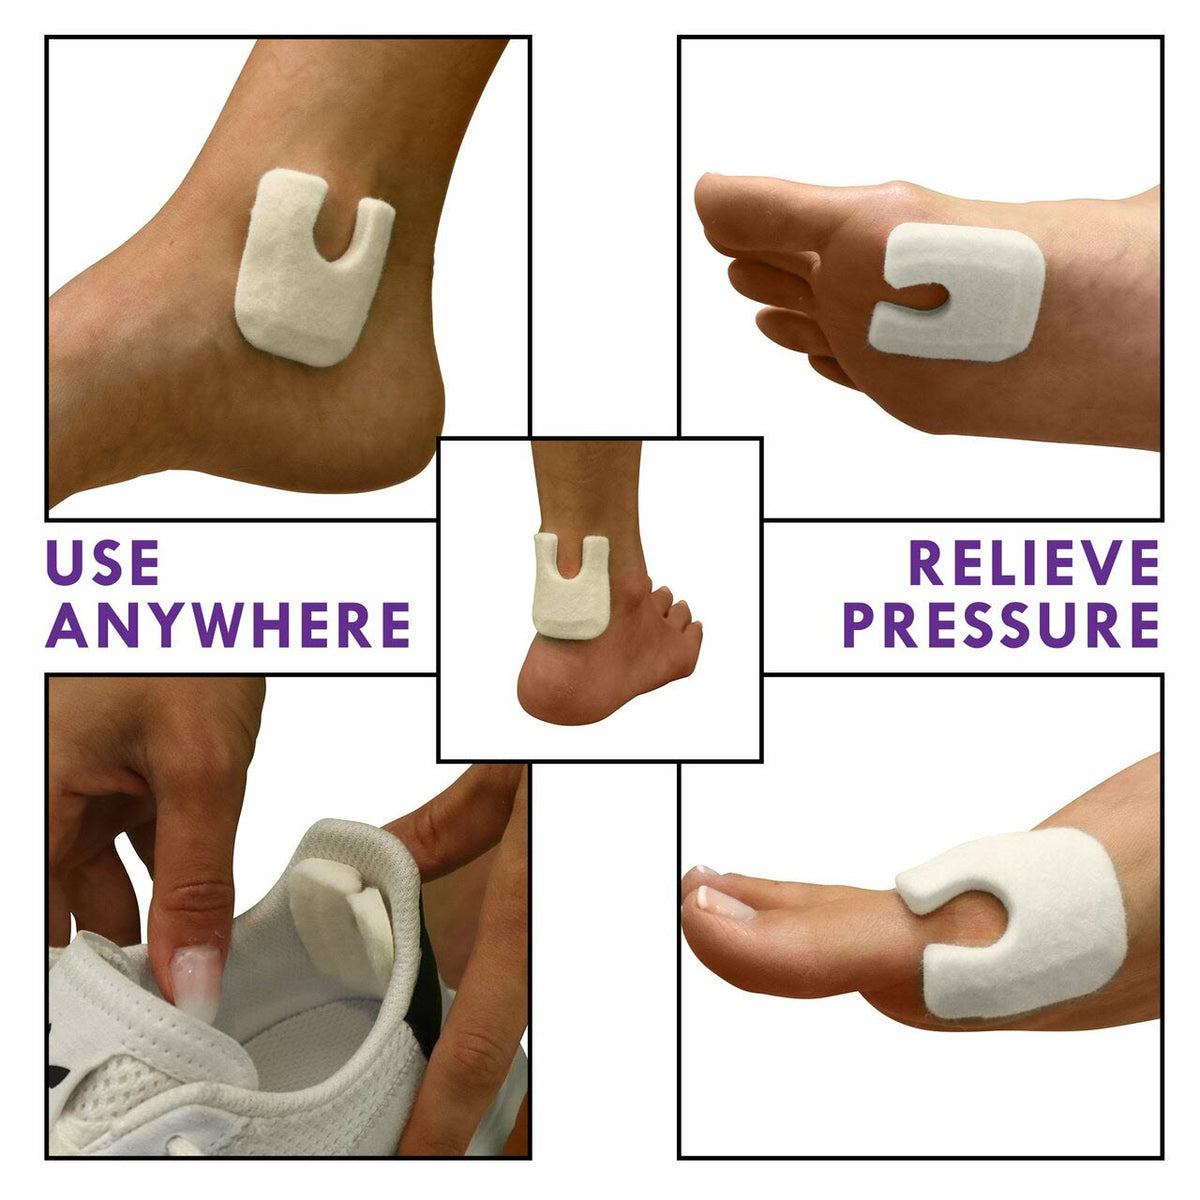 Collage showing Dr. Jill&#39;s LW FOOT CARE ADHESIVE U FELT PADS in various uses on hands and feet to demonstrate its versatility and pressure relief capabilities. Text on image reads &quot;use anywhere, relieve pressure, protects calluses.